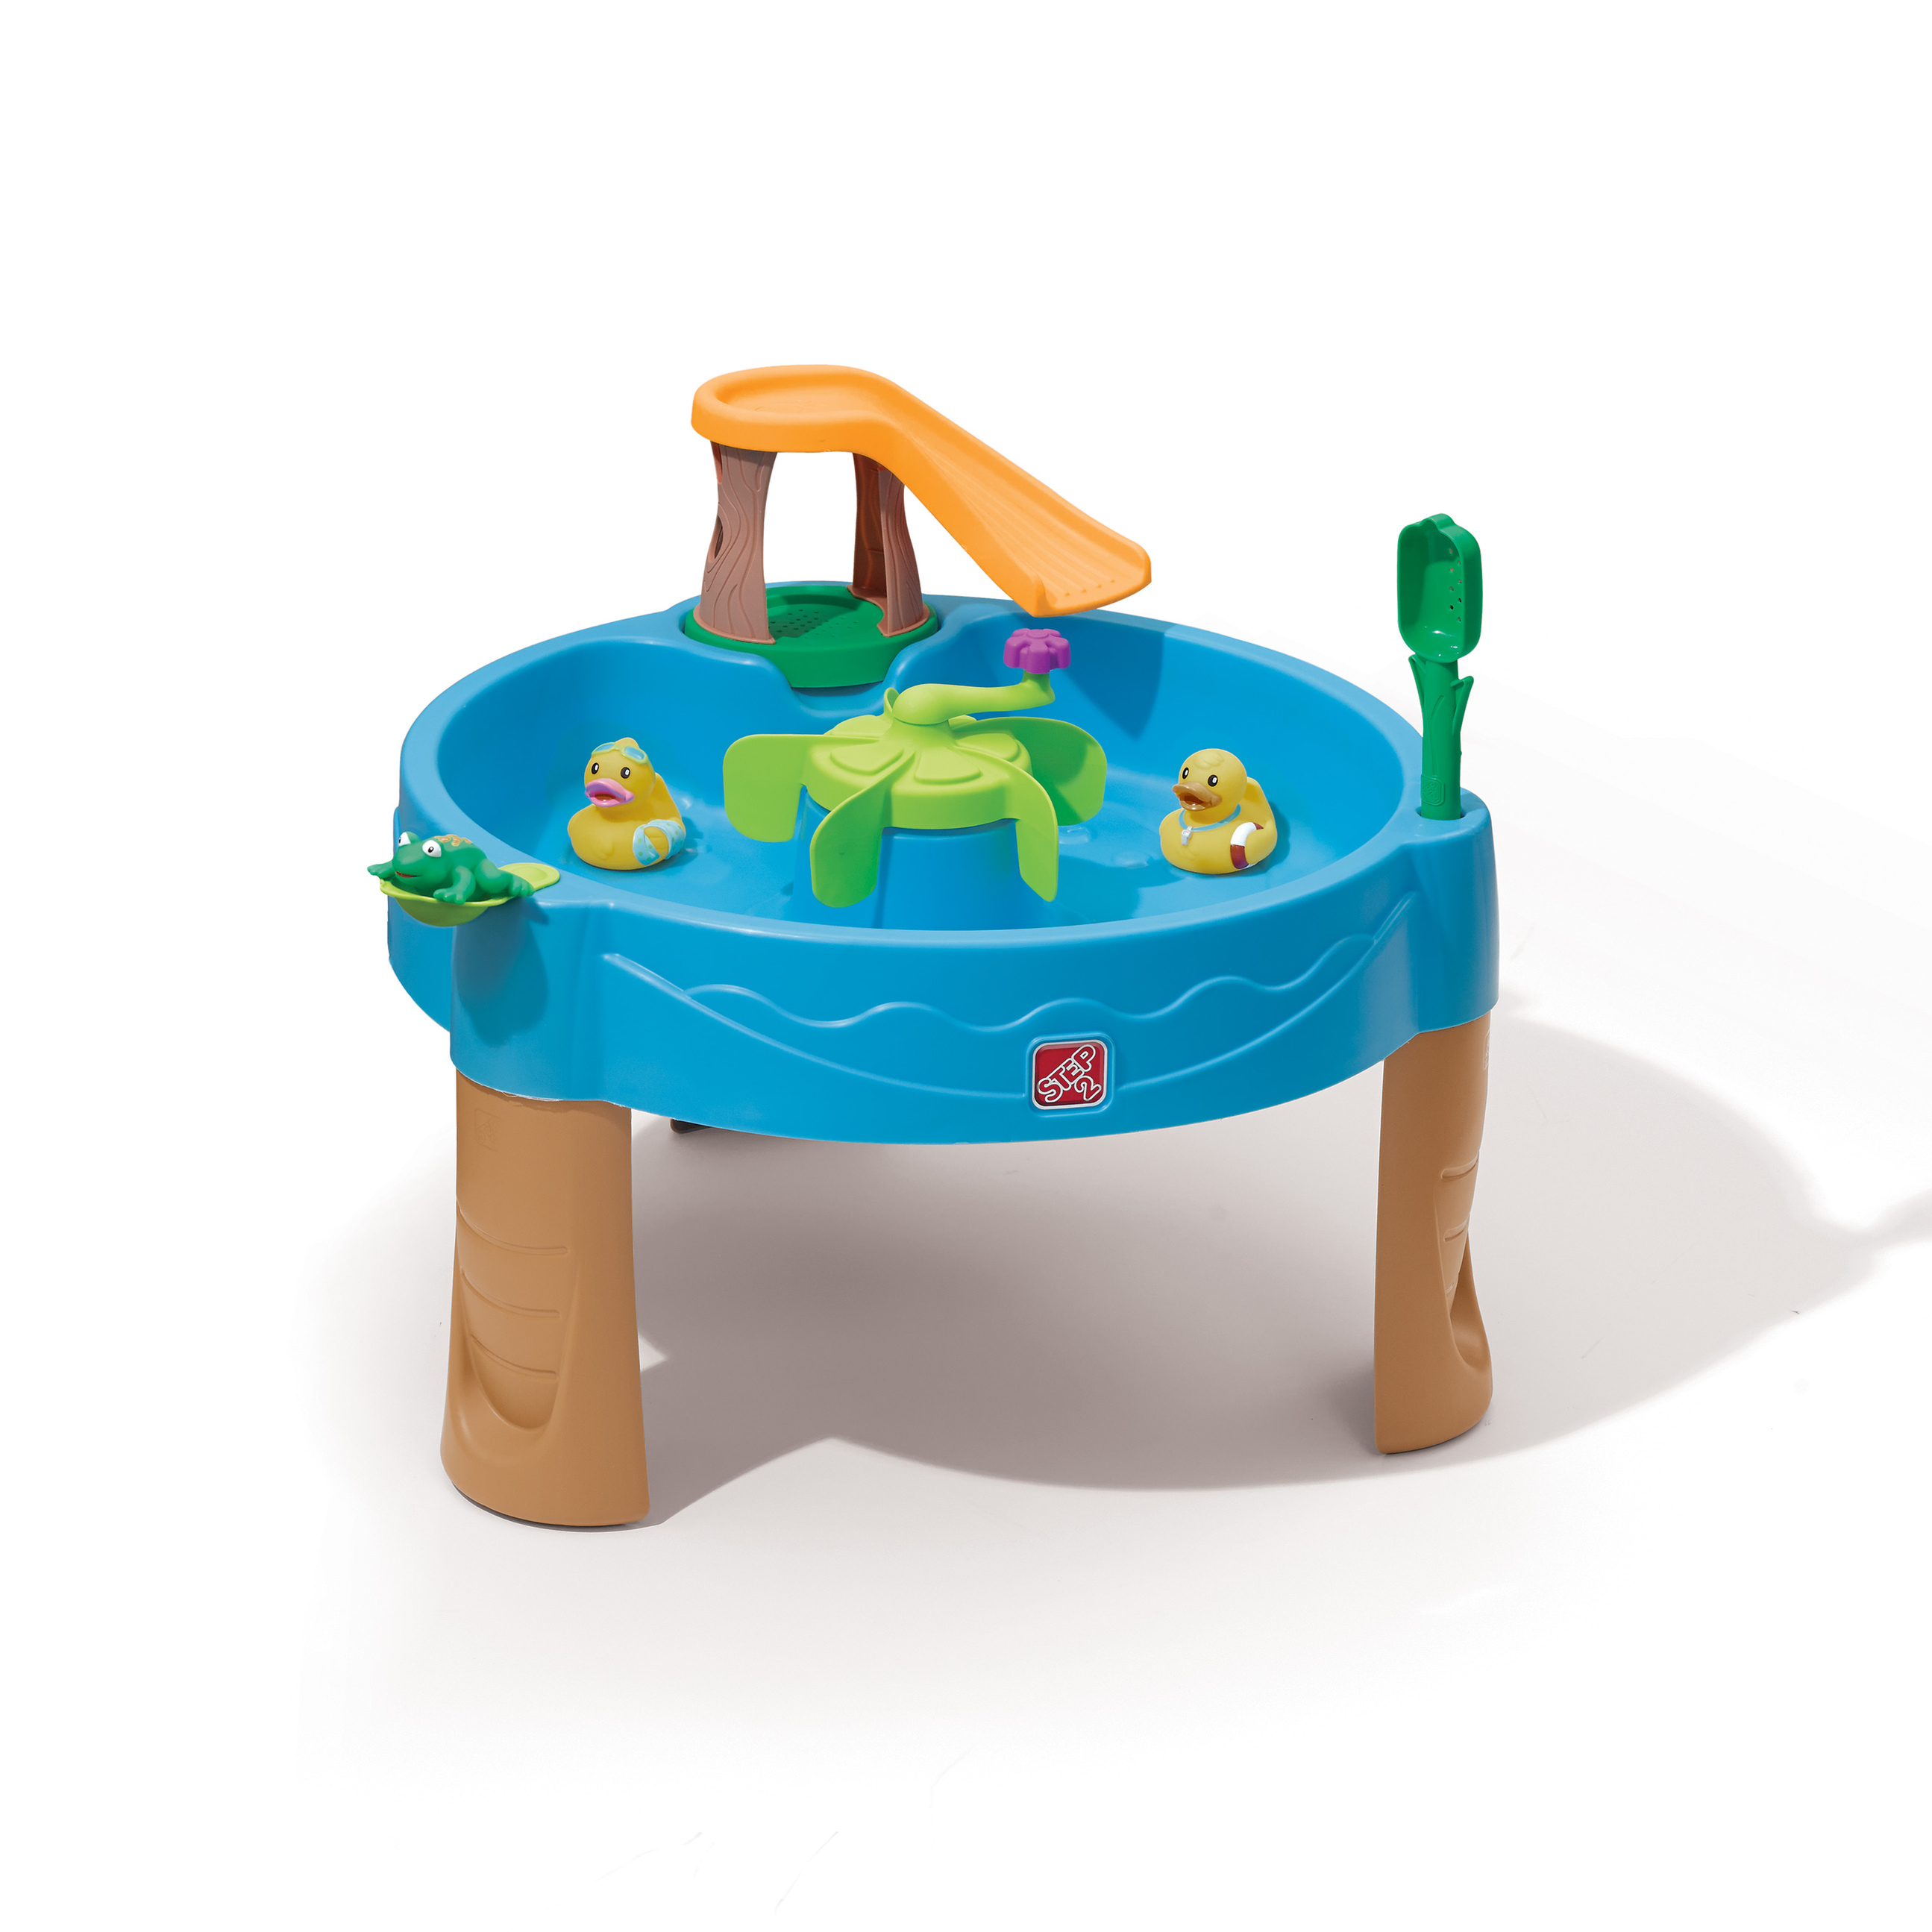 Step2 Duck Pond Blue Plastic Water Table for Toddler with 6-piece Playset - image 1 of 10